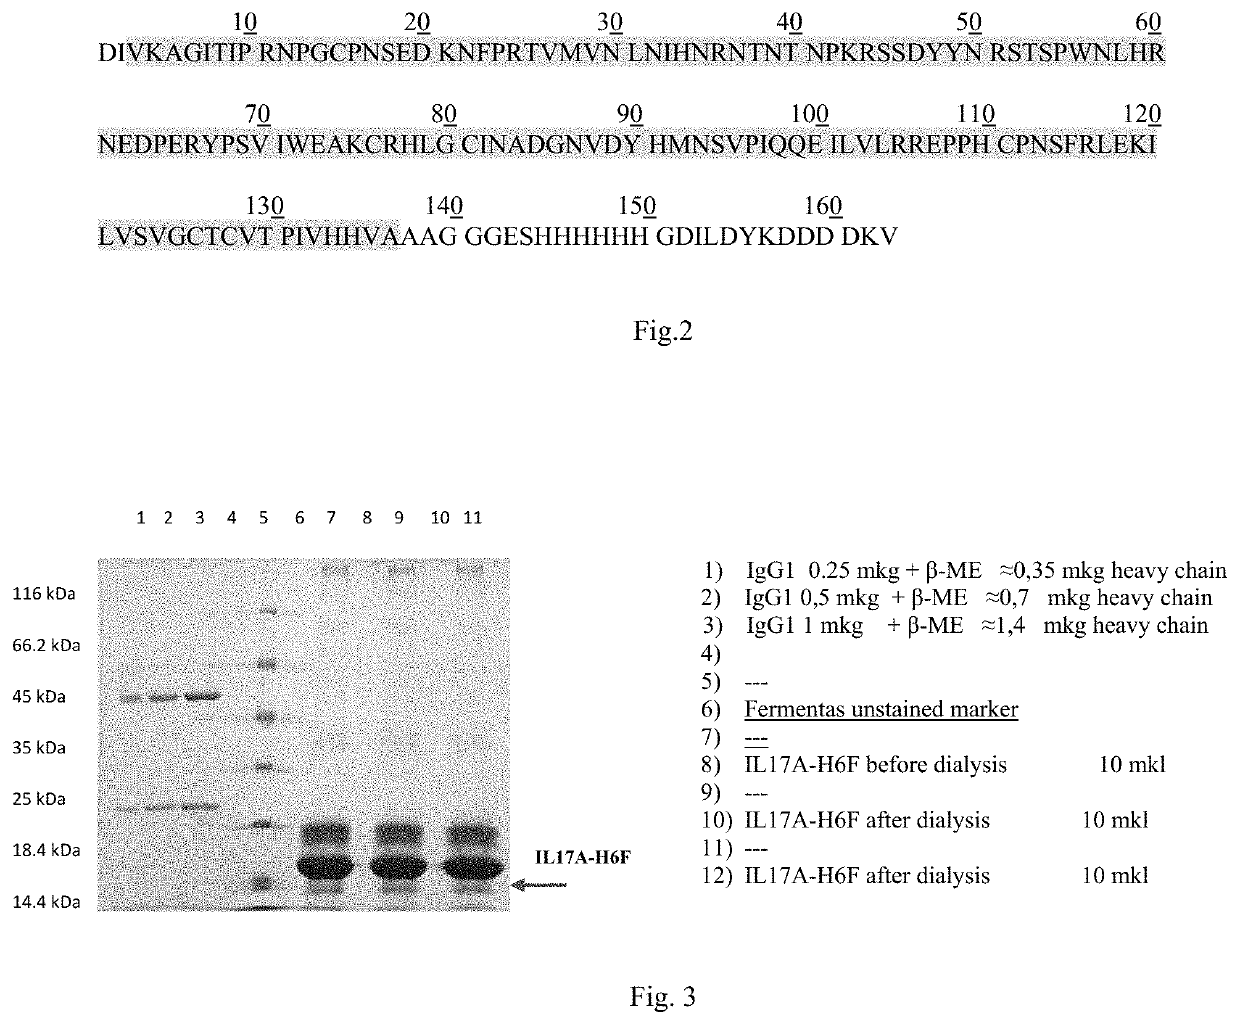 Trispecific antibodies against IL-17A, IL-17F and other pro-inflammatory molecule